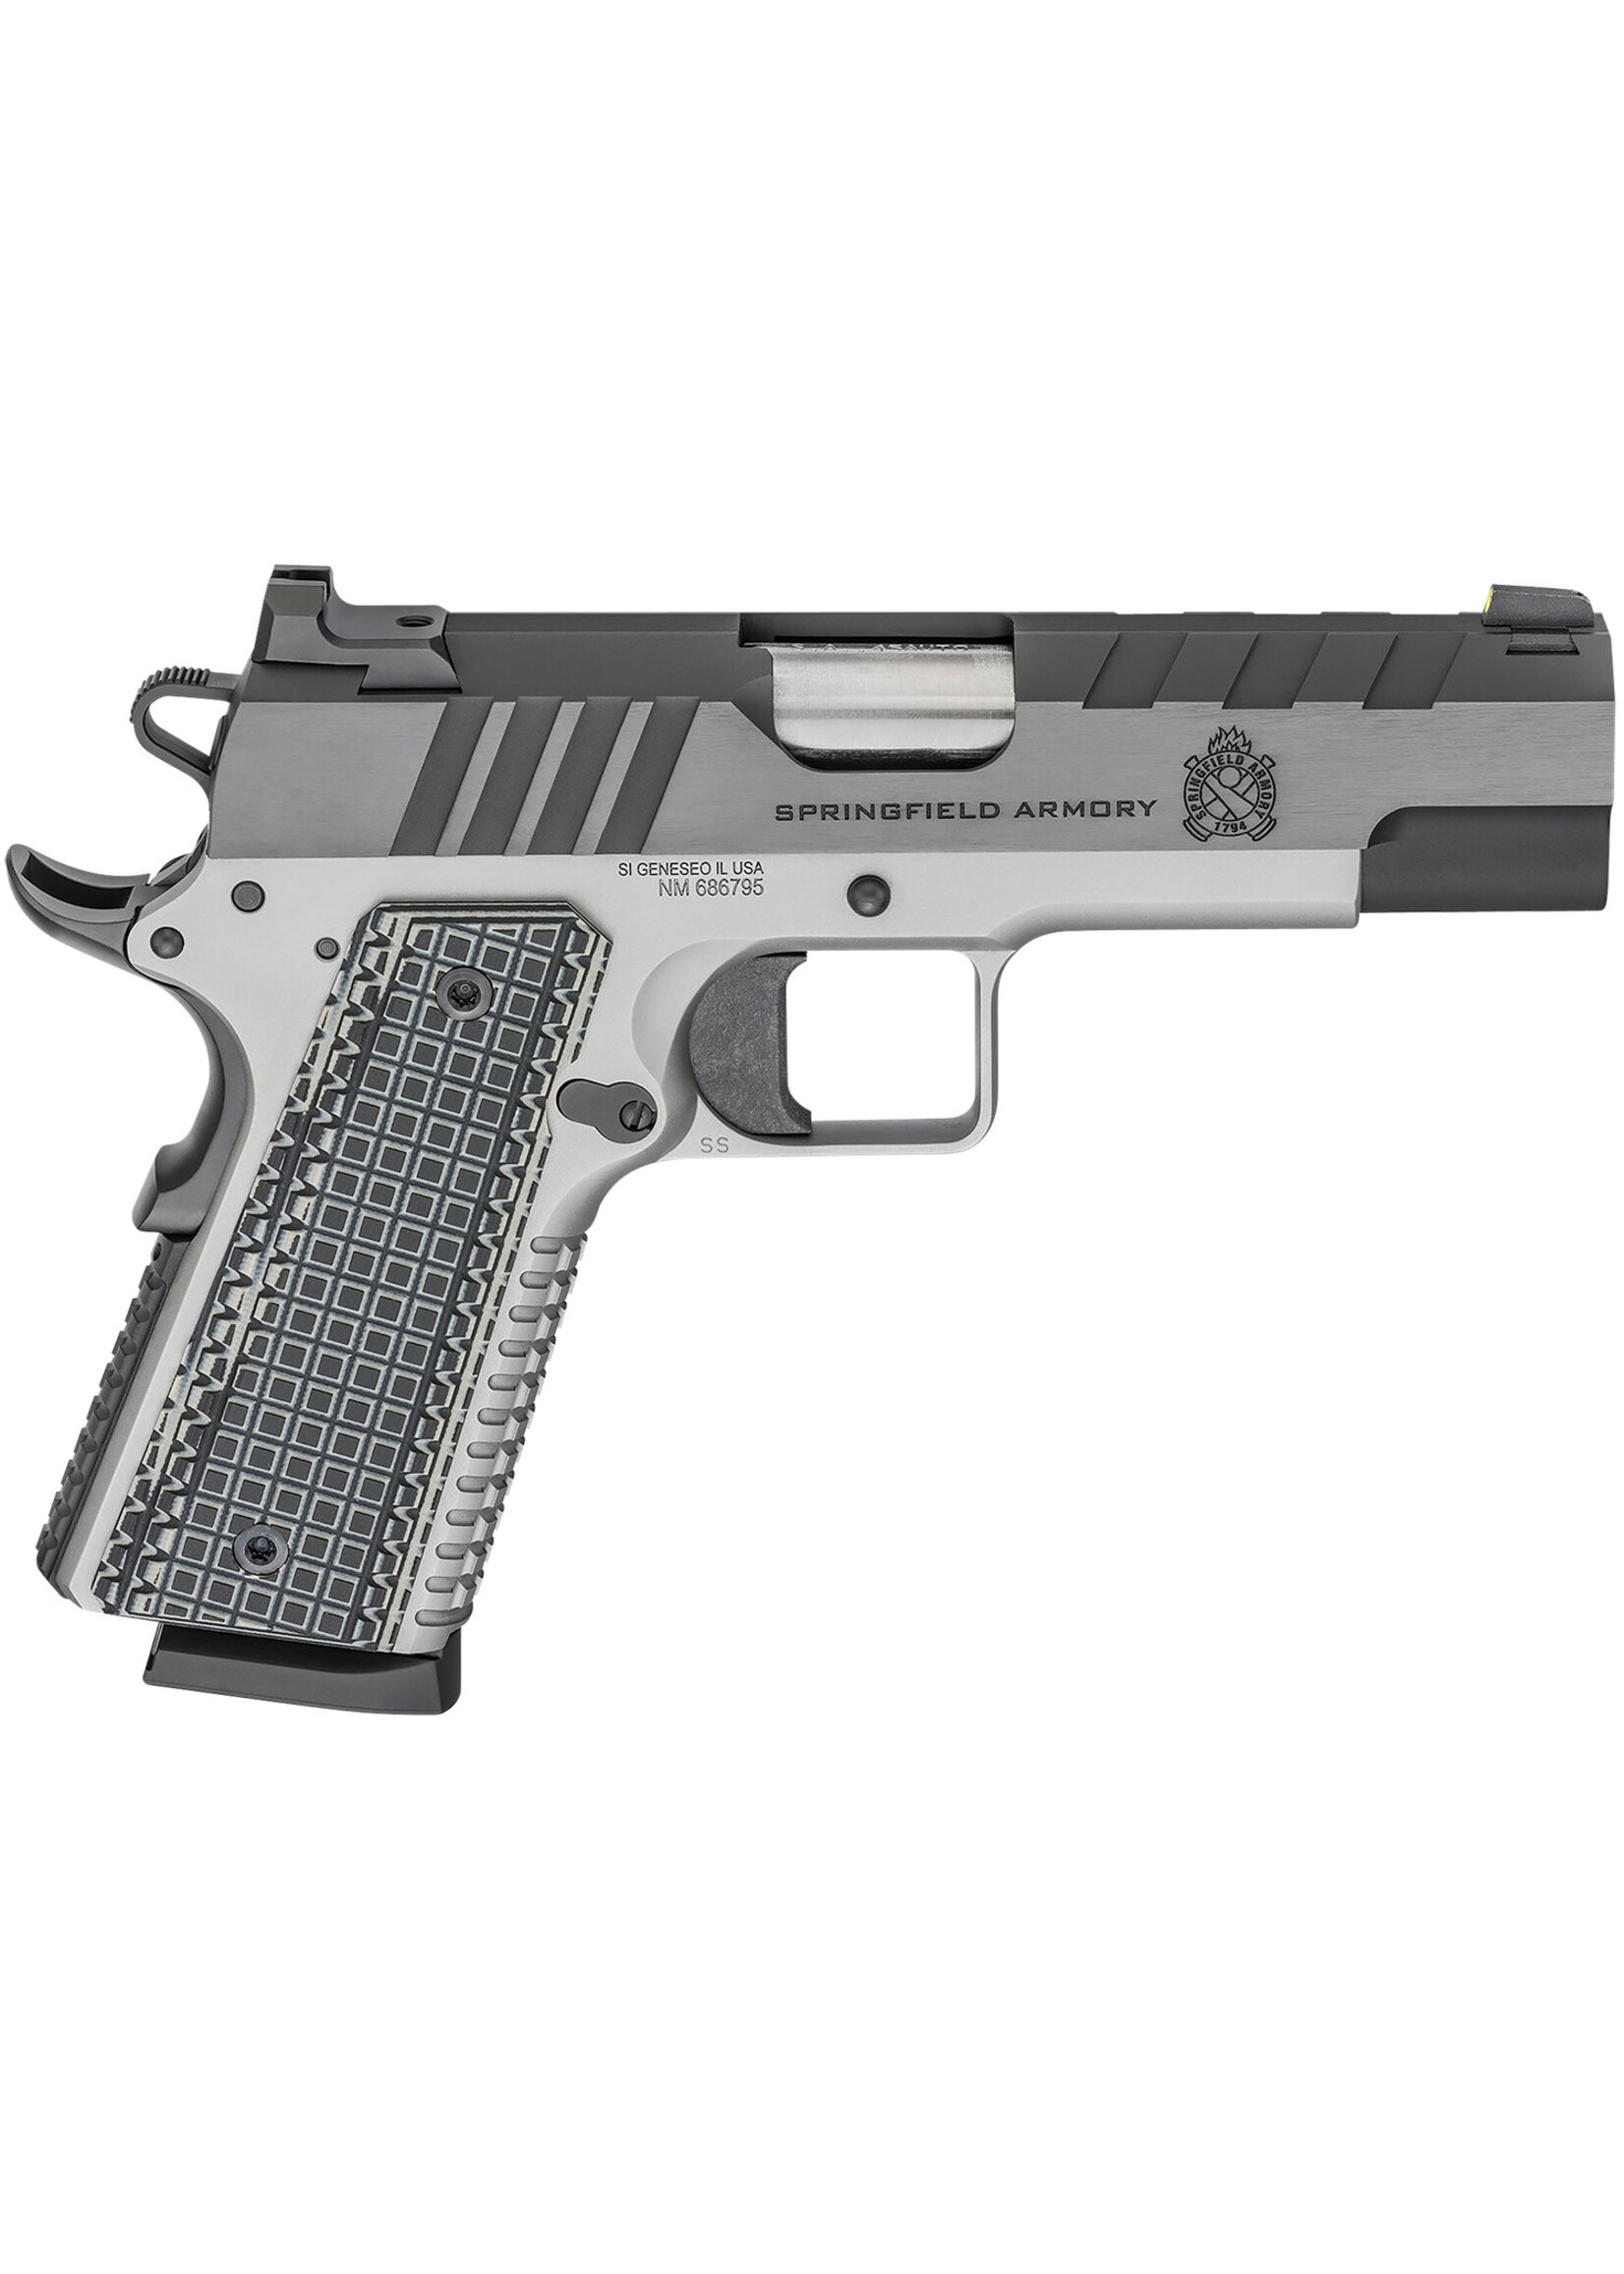 Springfield Armory Springfield Armory PX9218L 1911 Emissary 45 ACP 8+1, 4.25" Stainless Match Grade Bull Steel Barrel, Blued/Stainless Serrated/Tri-Top Cut Steel Slide, Stainless Steel Frame w/Beavertail, Black VZ Thin-Line G10 Grip, Right Hand